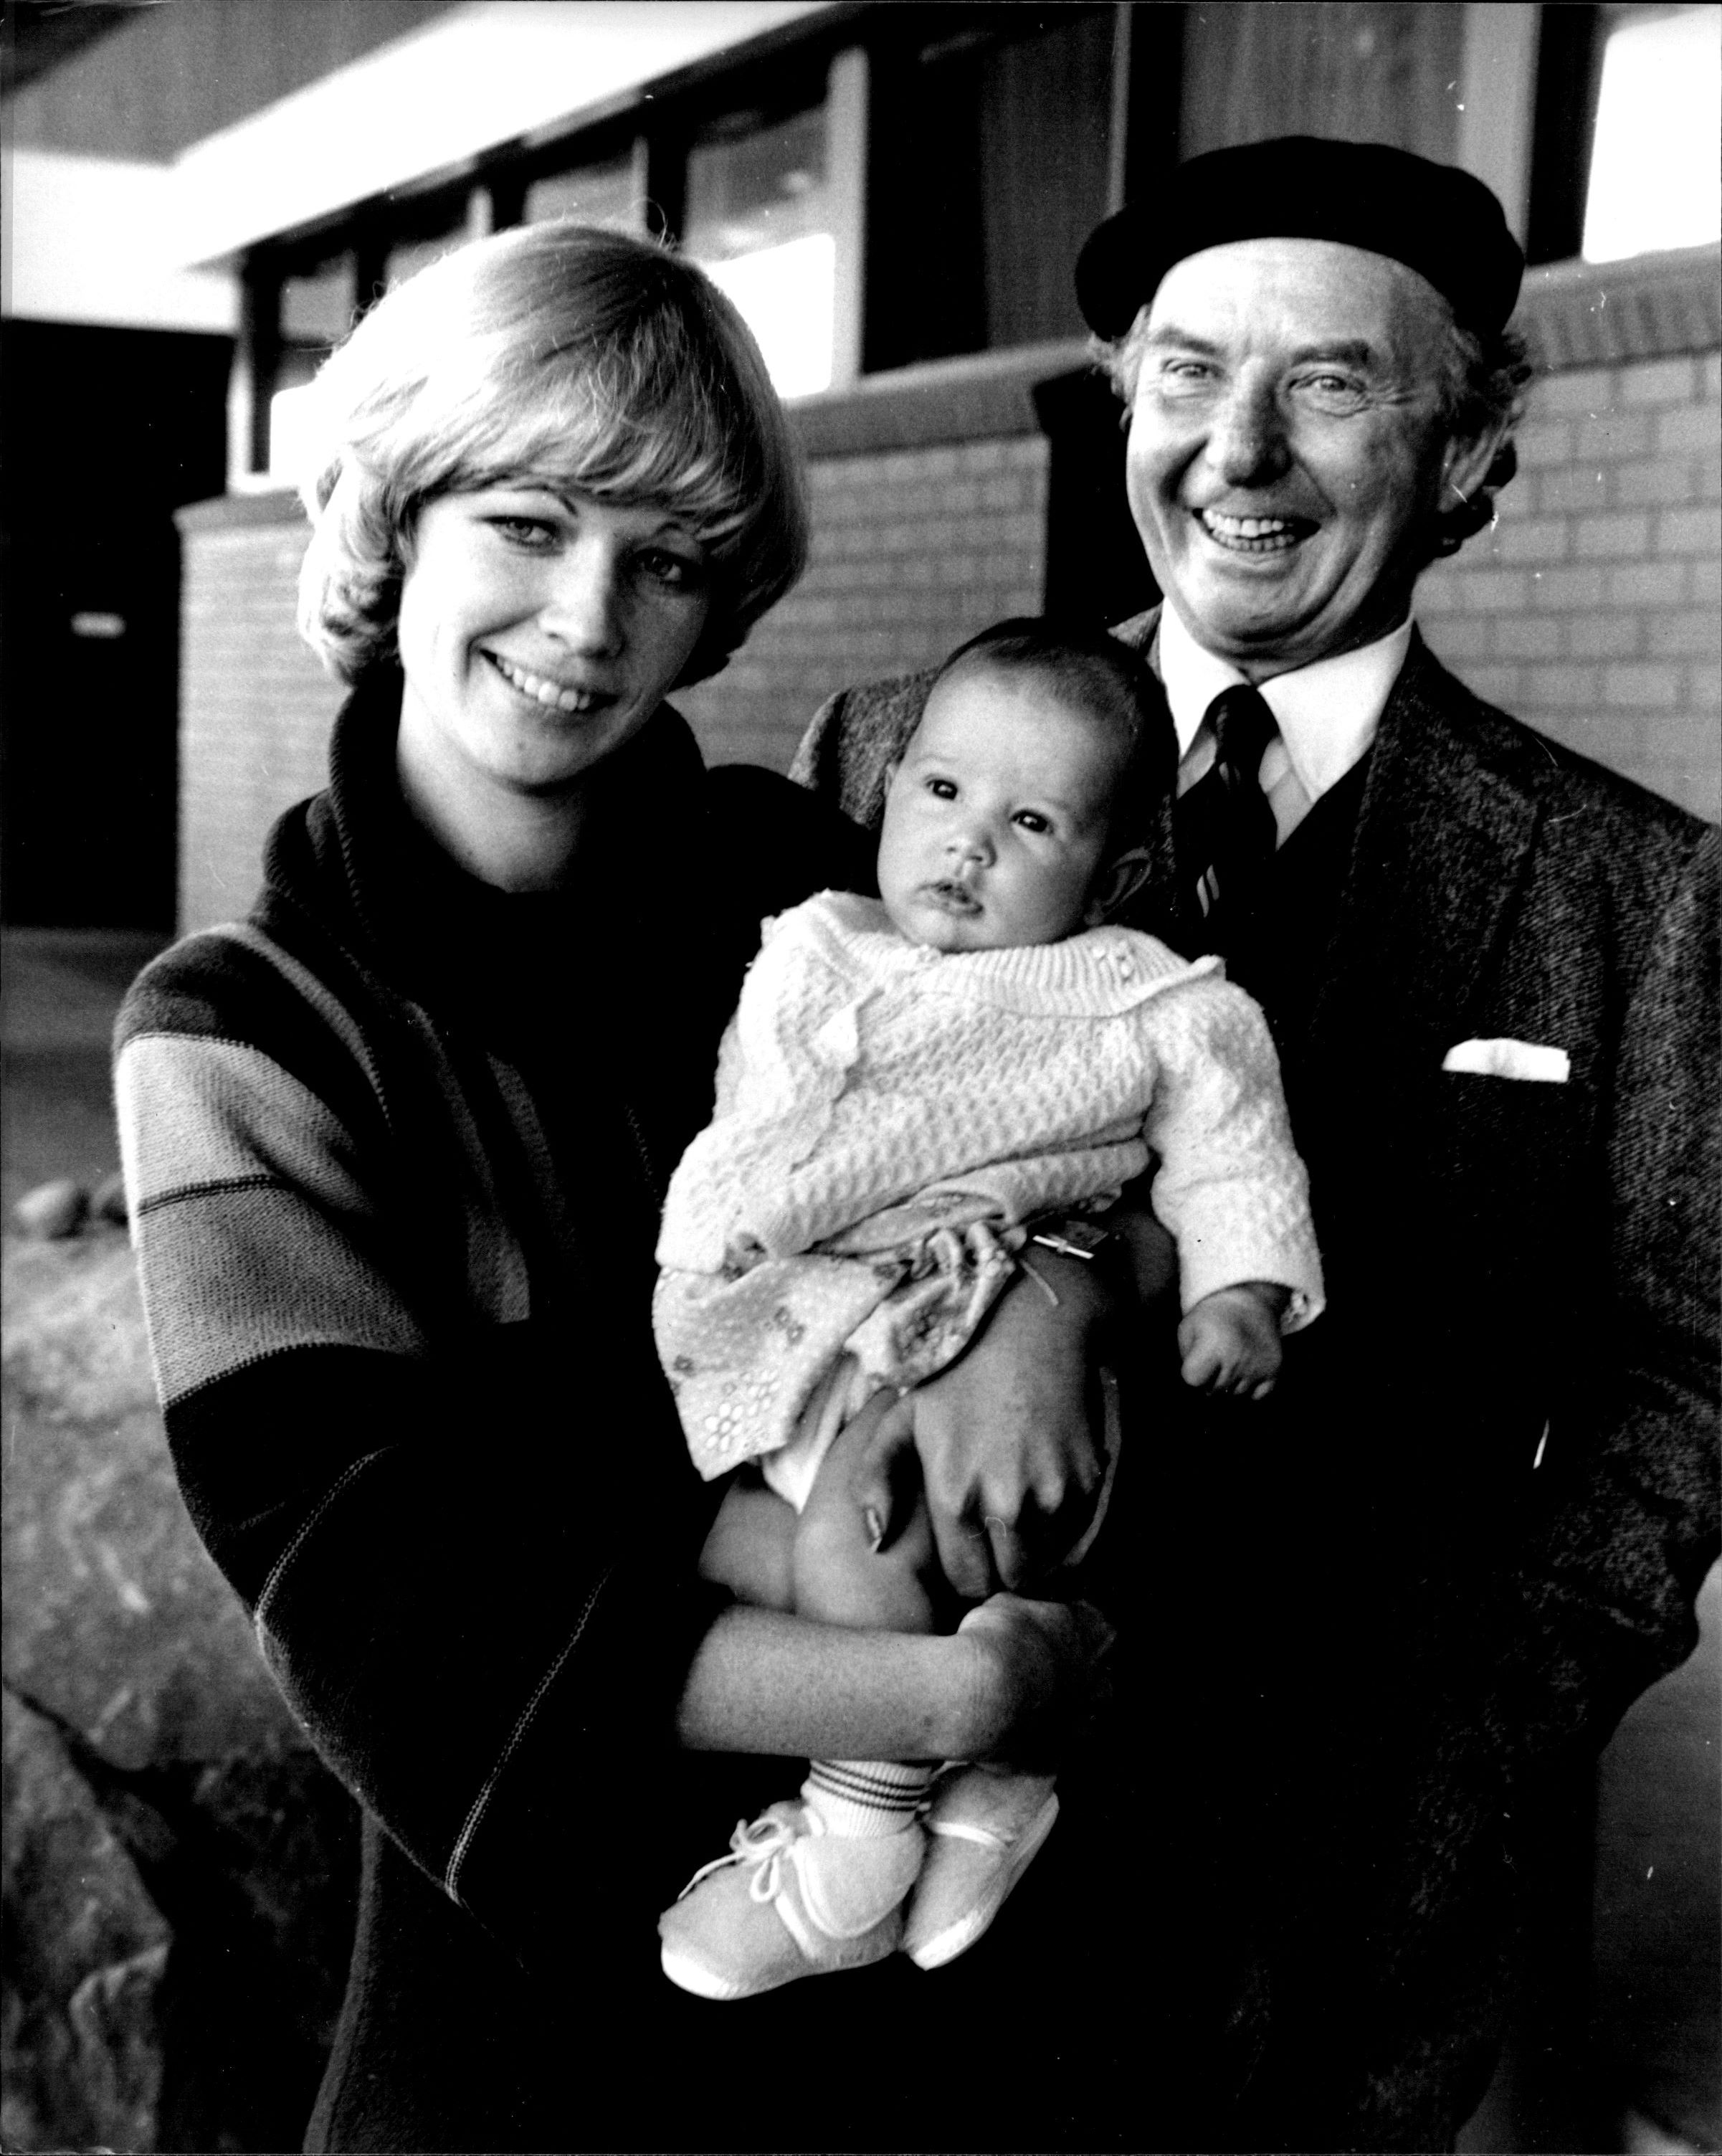 Kim Gibb, the wife of rock star Andy Gibb, returned to Sydney with her barrister, Laurence Gruzman. She is pictured with her 3 month old baby, Peta, who was waiting at the airport with her mother. April 22, 1978. | Source: Getty Images